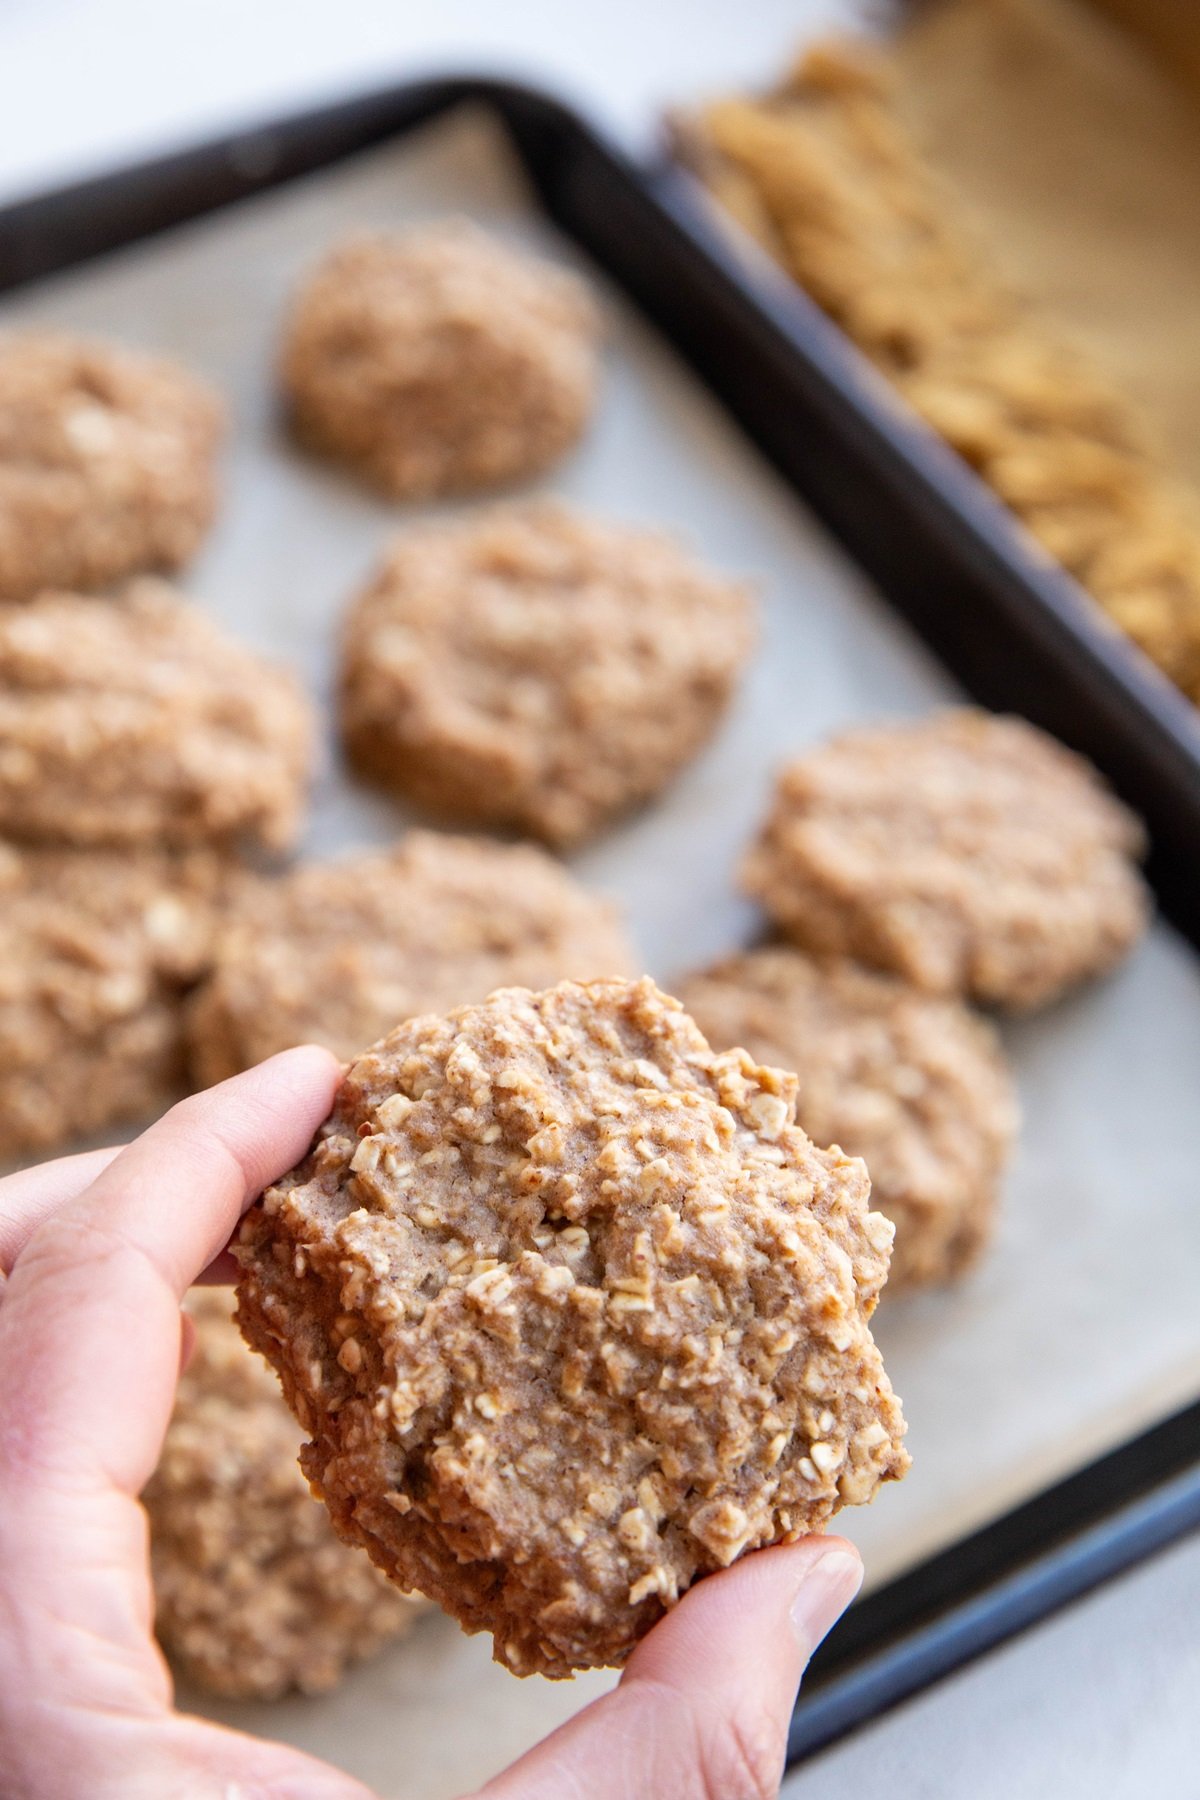 Hand holding an applesauce oatmeal cookie, ready to take a bite, with the rest of the baking sheet of cookies in the background.